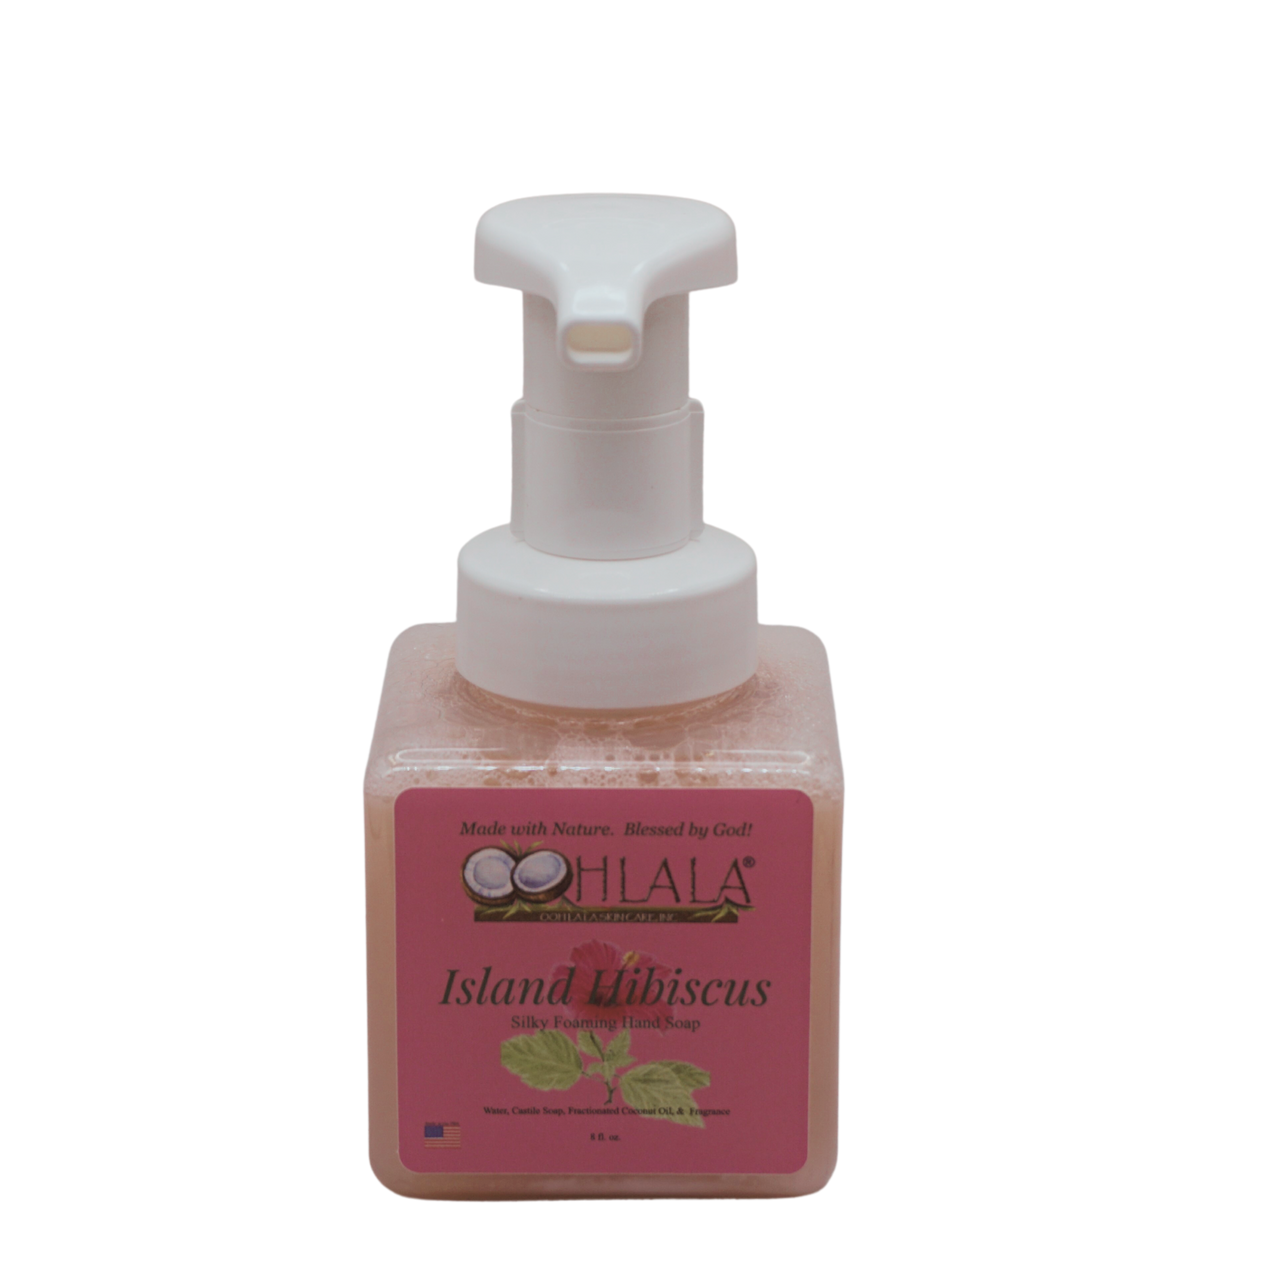 Island Hibiscus Silky Foaming Hand Soap